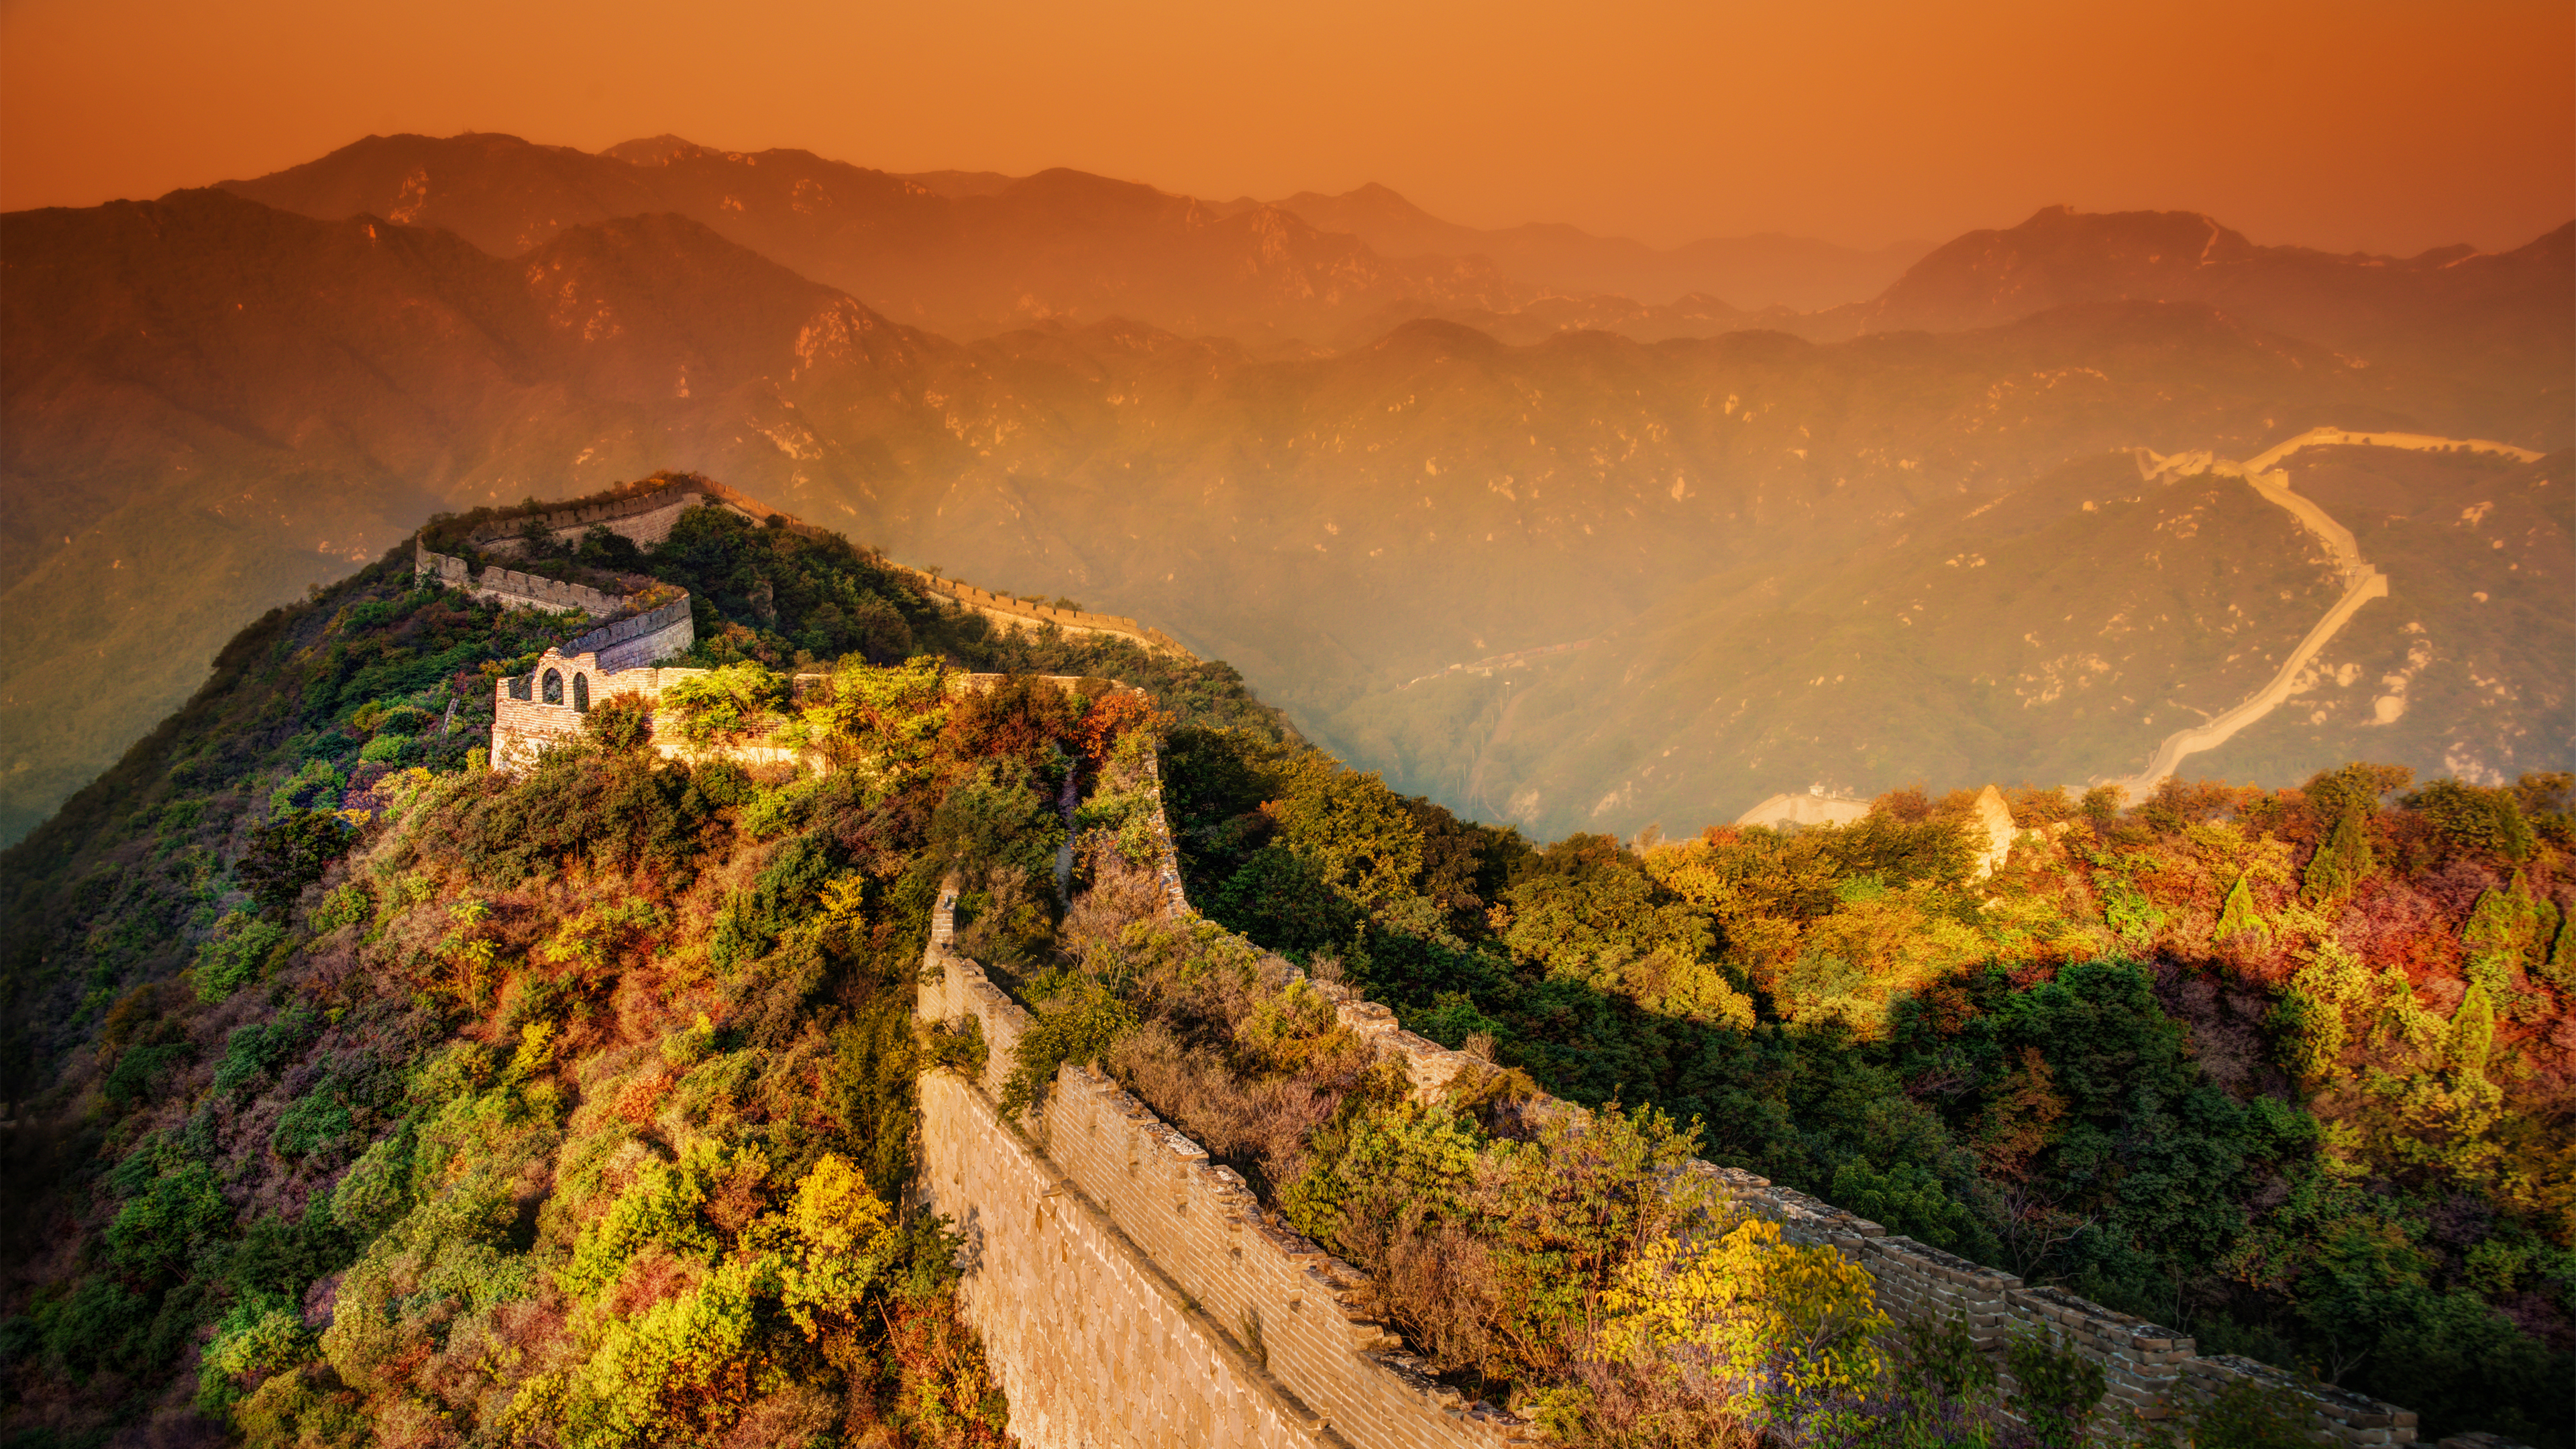 General 3840x2160 China photography Trey Ratcliff Great Wall of China trees nature mountains evening sunset glow